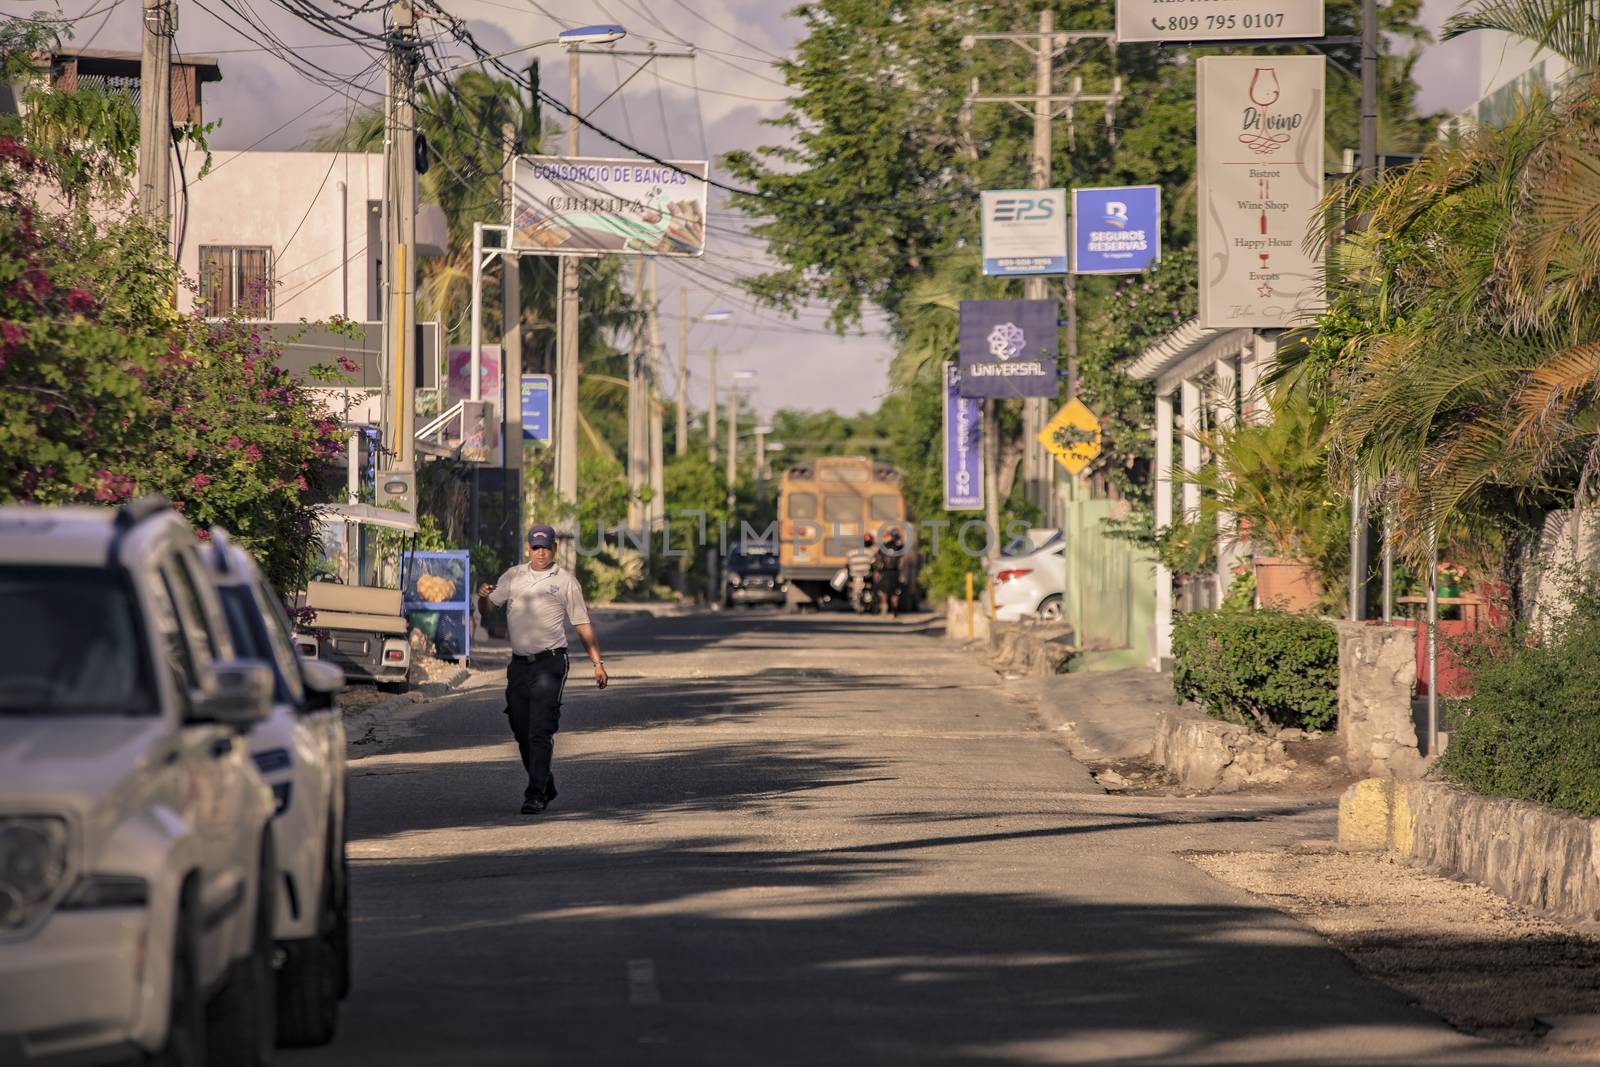 BAYAHIBE, DOMINICAN REPUBLIC 23 DECEMBER 2019: Dominican People in the streets in Bayahibe